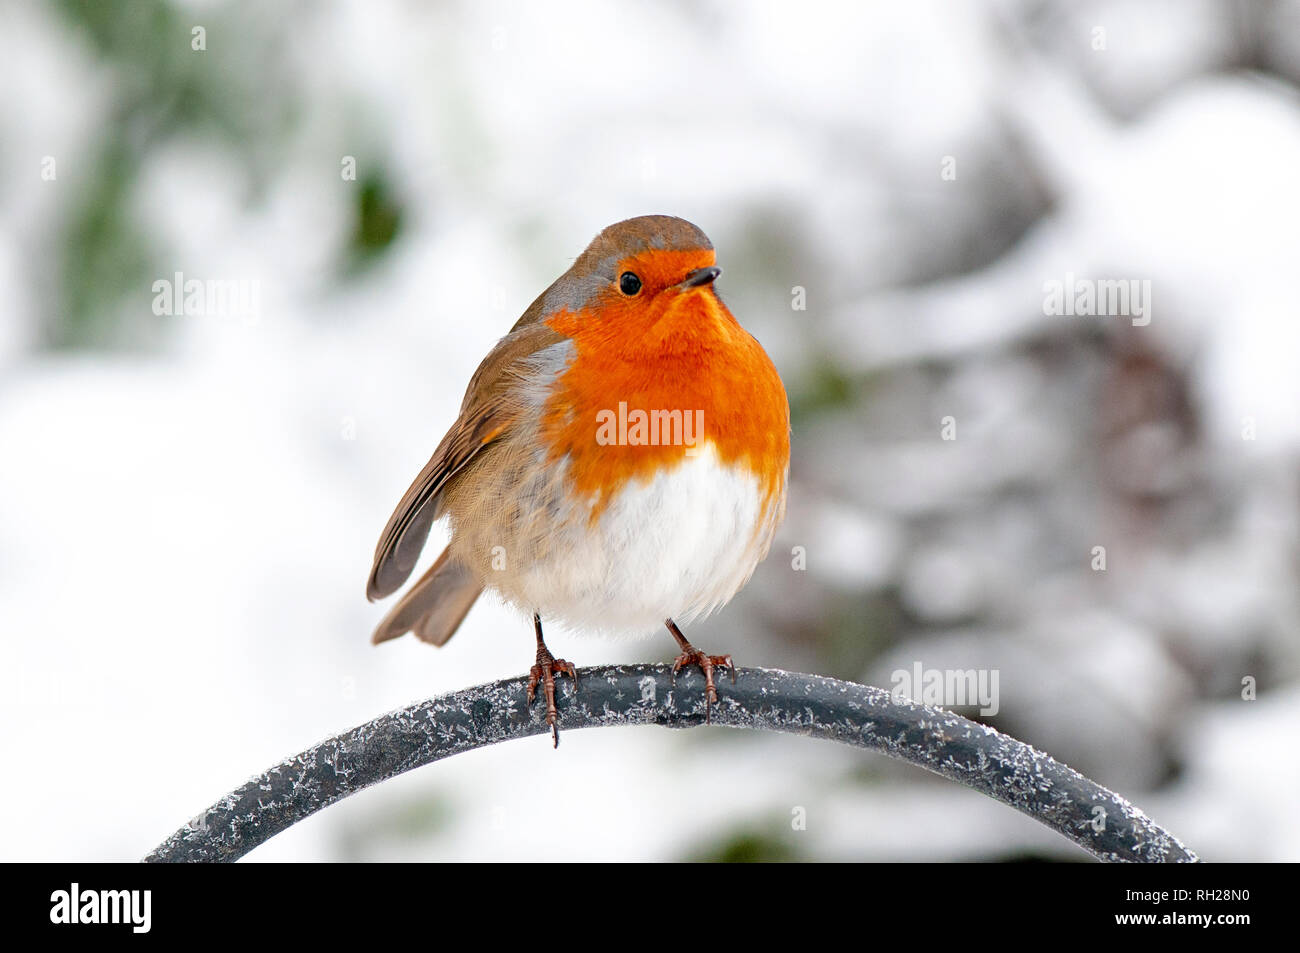 Close-up image of a European Robin red breast perched in the winter snow Stock Photo